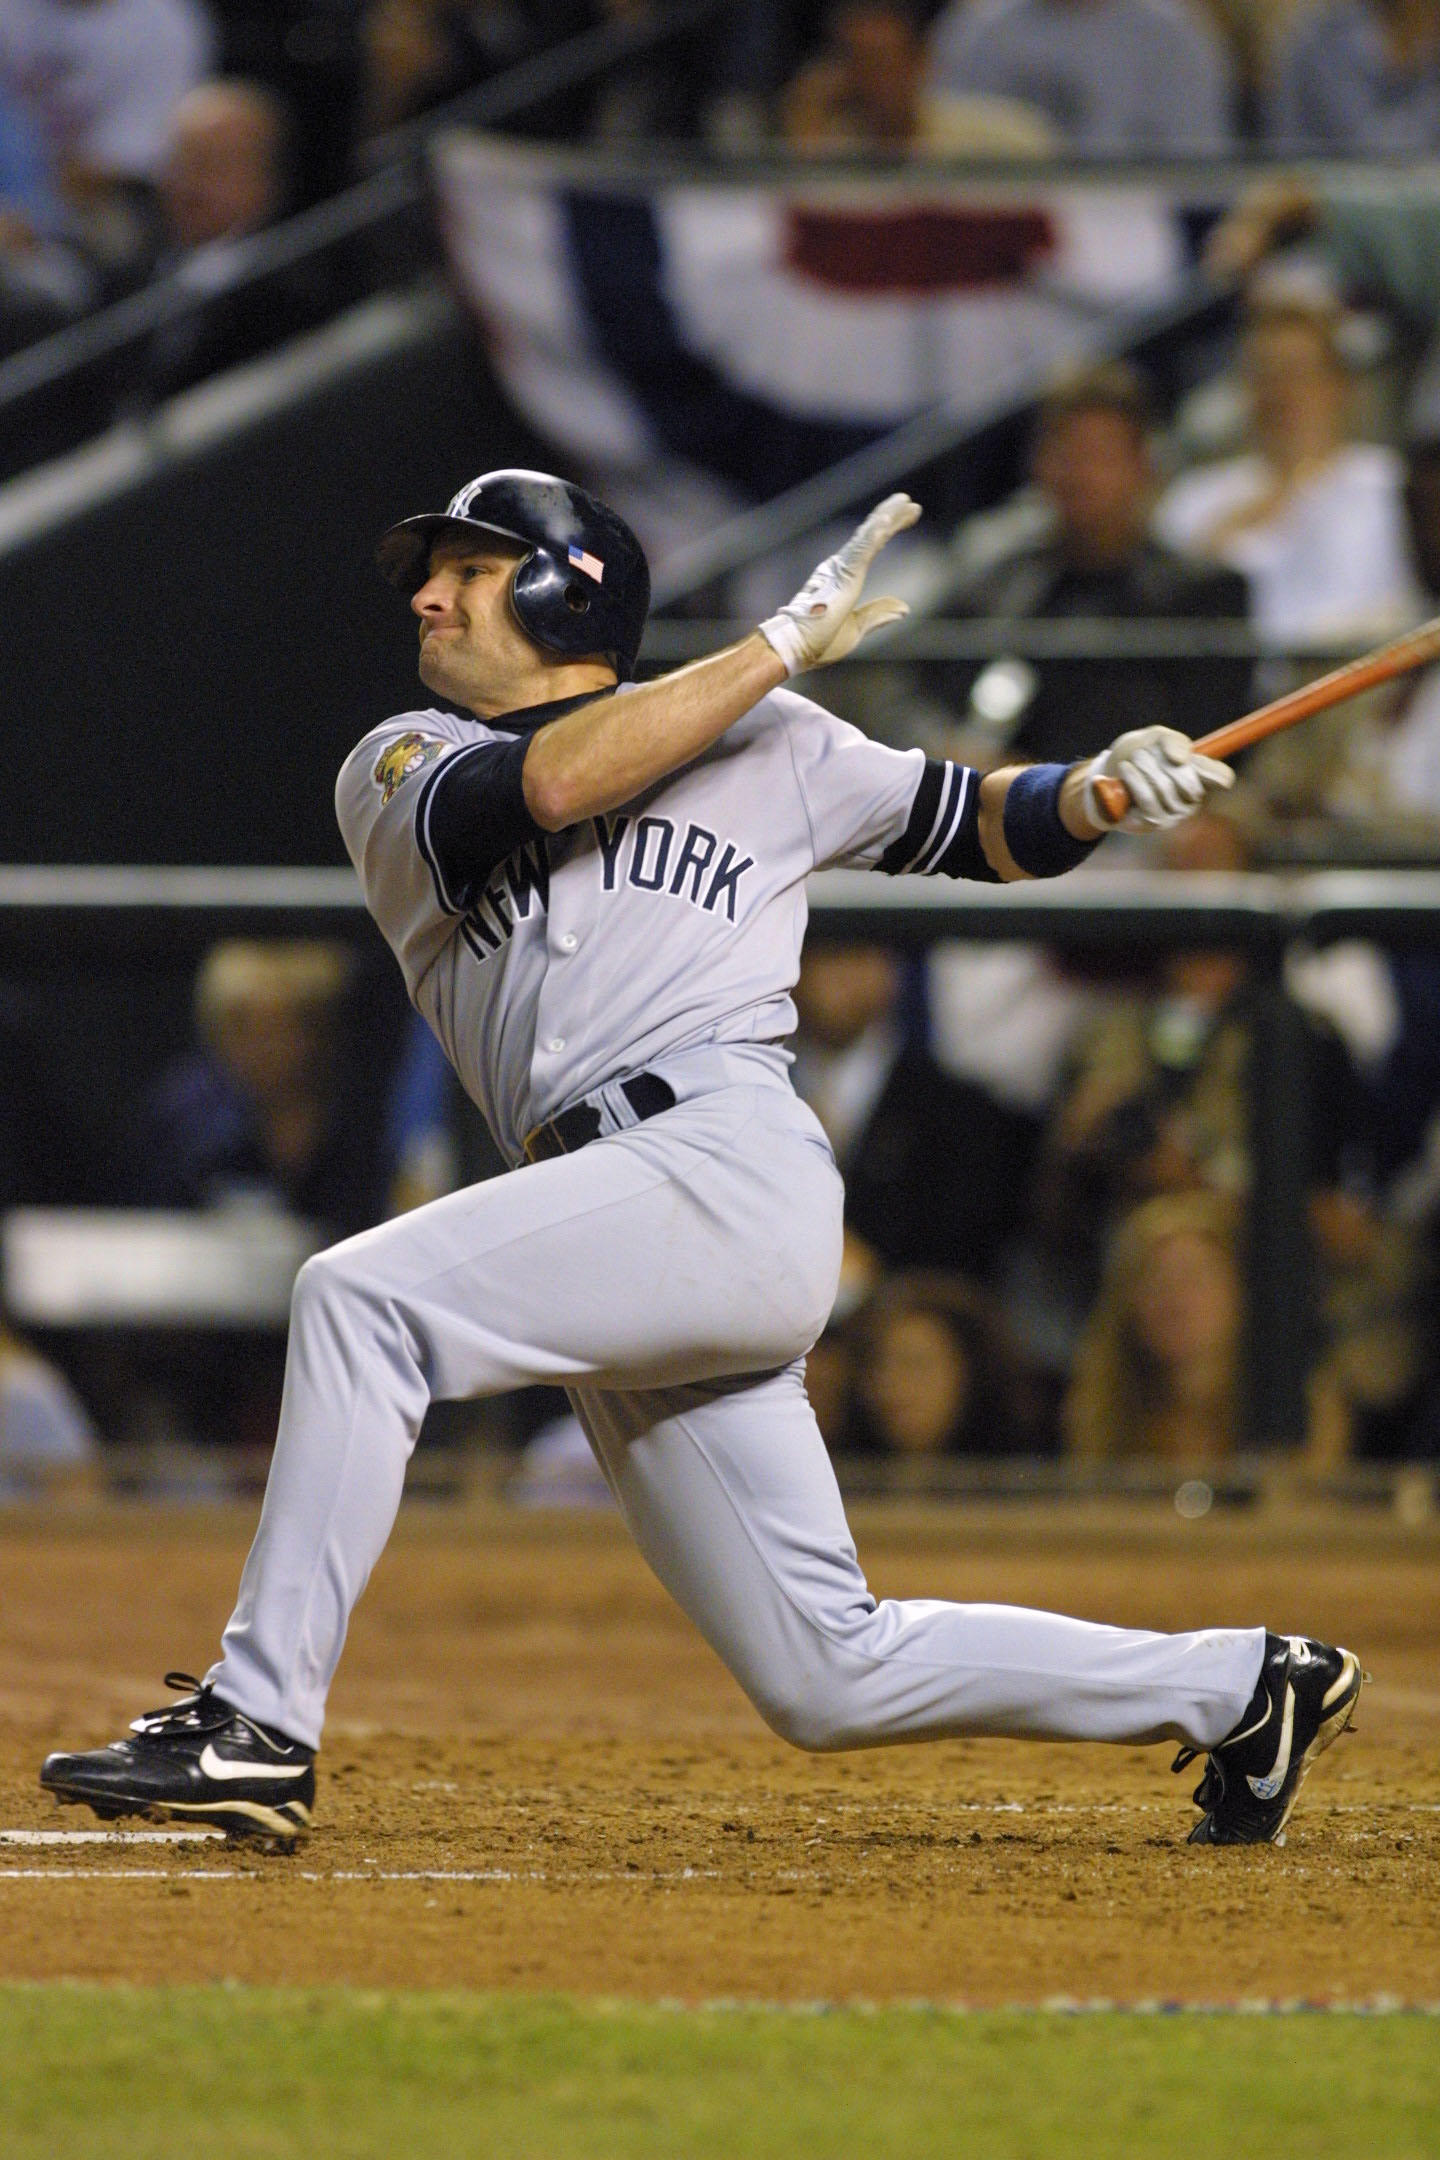 28 Oct 2001: Chuck Knoblauch #11 of the New York Yankees swings at a pitch during game 2 of the World Series against the Arizona Diamondbacks at Bank One Ballpark in Phoenix, Arizona. The Diamondbacks win, 4-0 over the Yankees. DIGITAL IMAGE Mandatory Cre